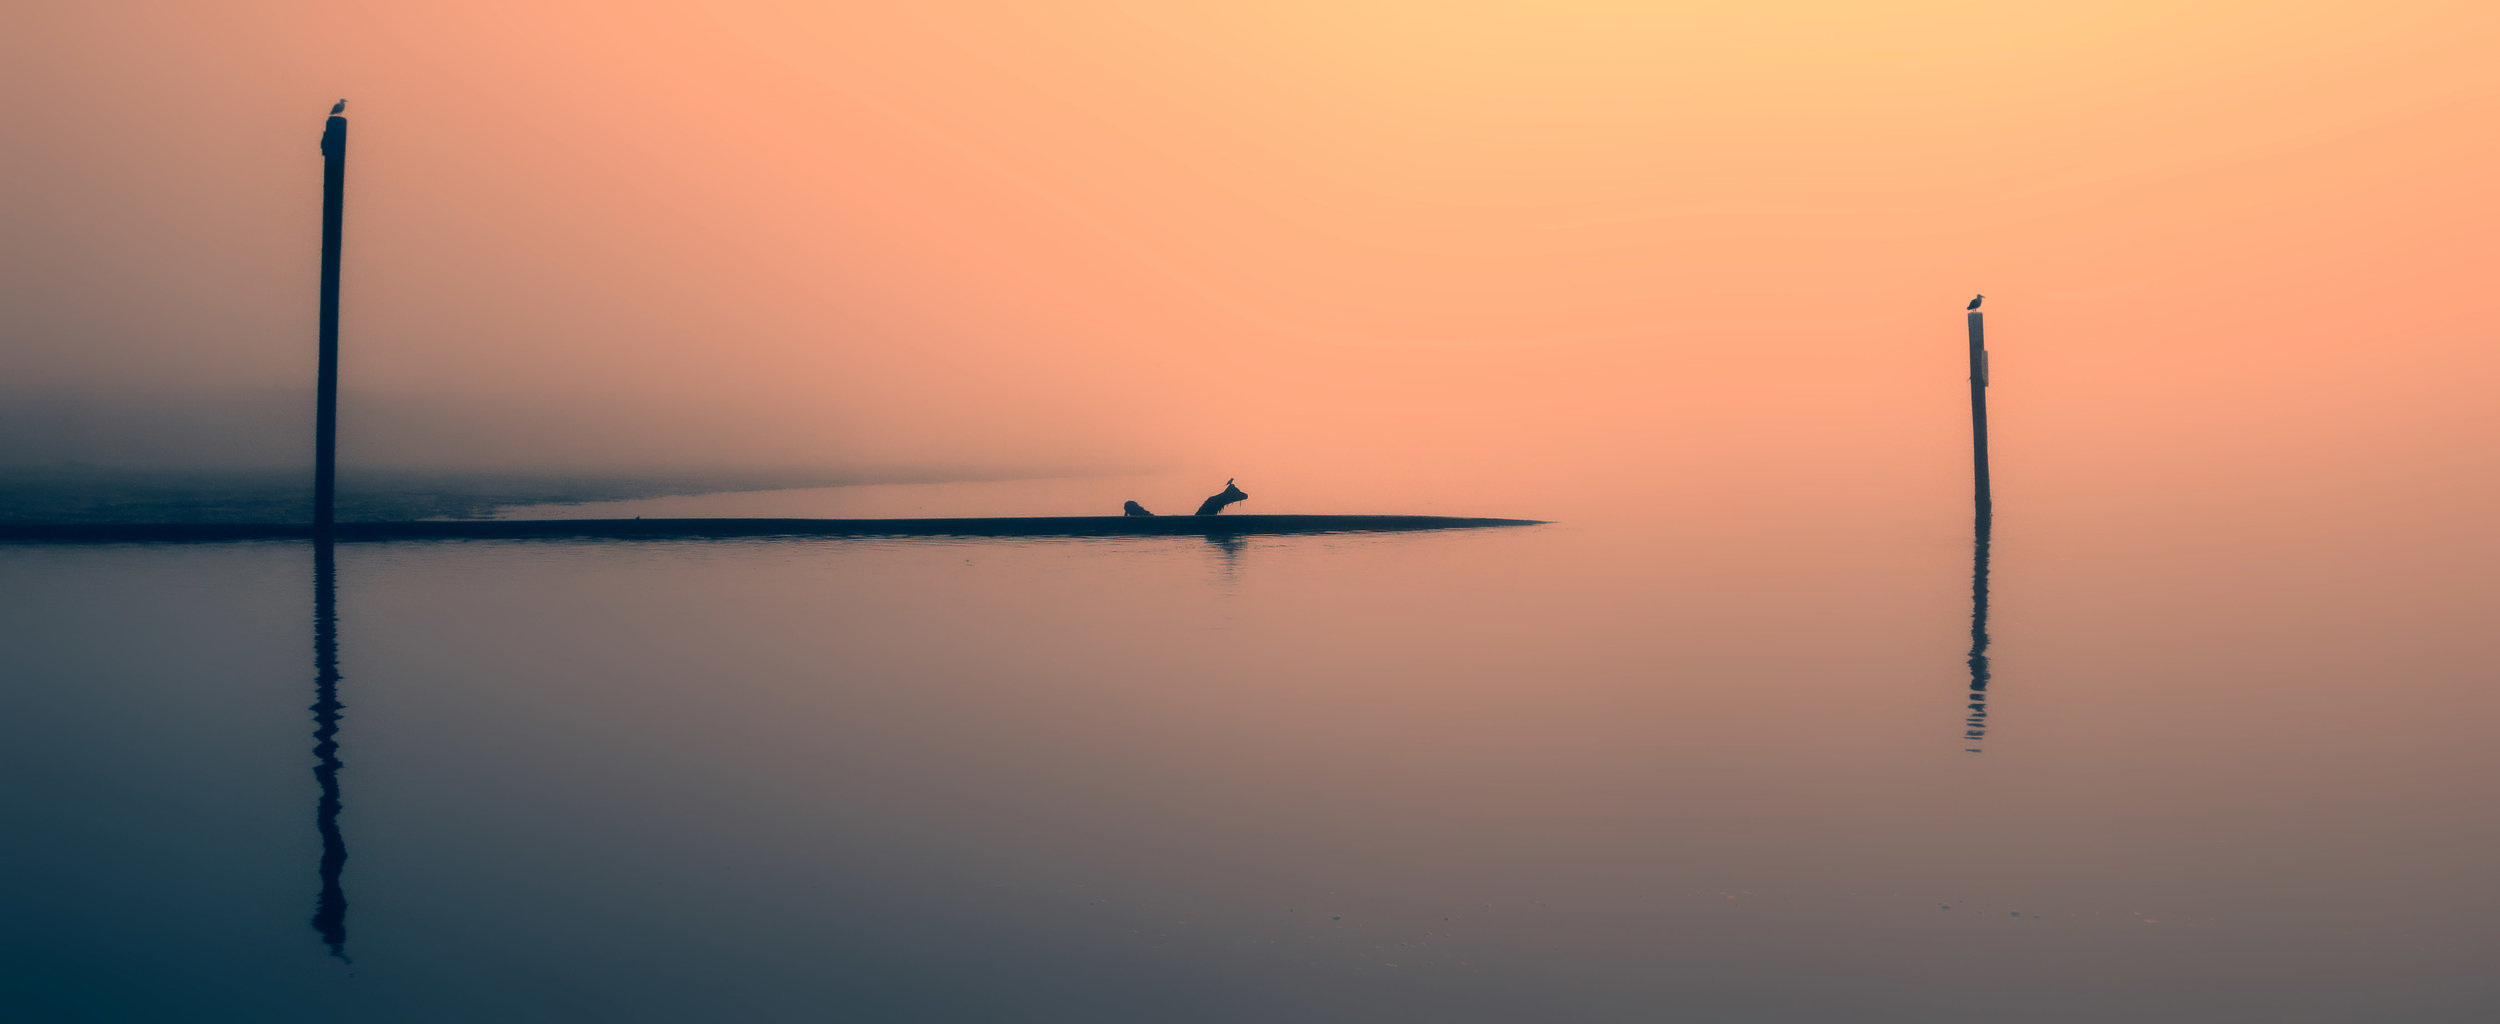  This is somewhat of a minimalist shot. &nbsp;I was struck by both its simplicity and calmness as well as the interesting way the morning fog blended the water and sky into a seamless background. 